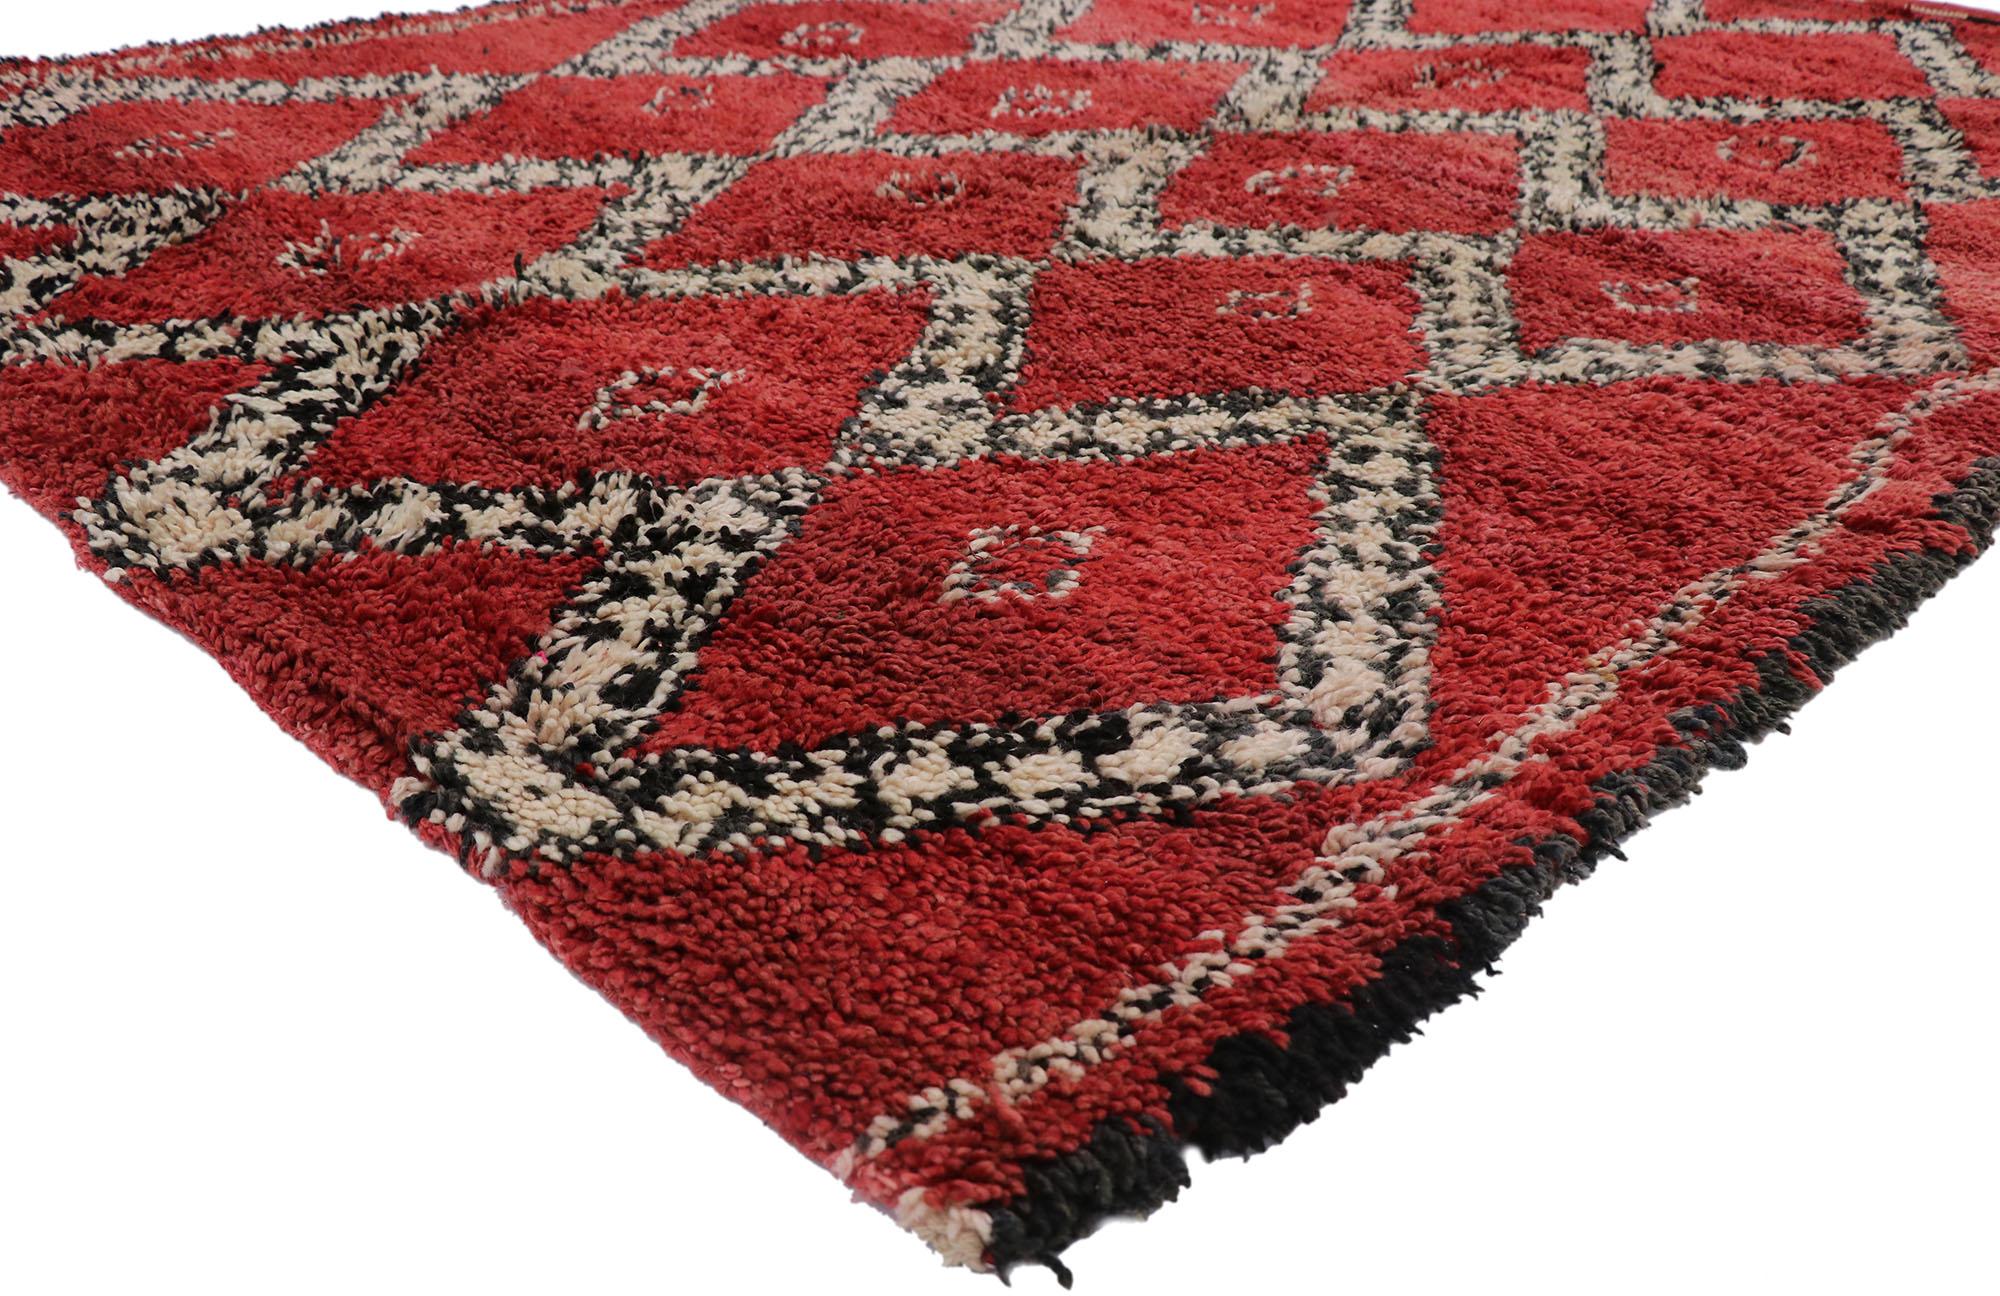 21262 Vintage Moroccan Beni Ourain Rug, 06'06 x 09'00. Cohesive coziness meets boho luxe in this hand-knotted wool vintage Moroccan Beni Ourain rug. The intrinsic tribal design and classic colors woven into this piece work together to creating a